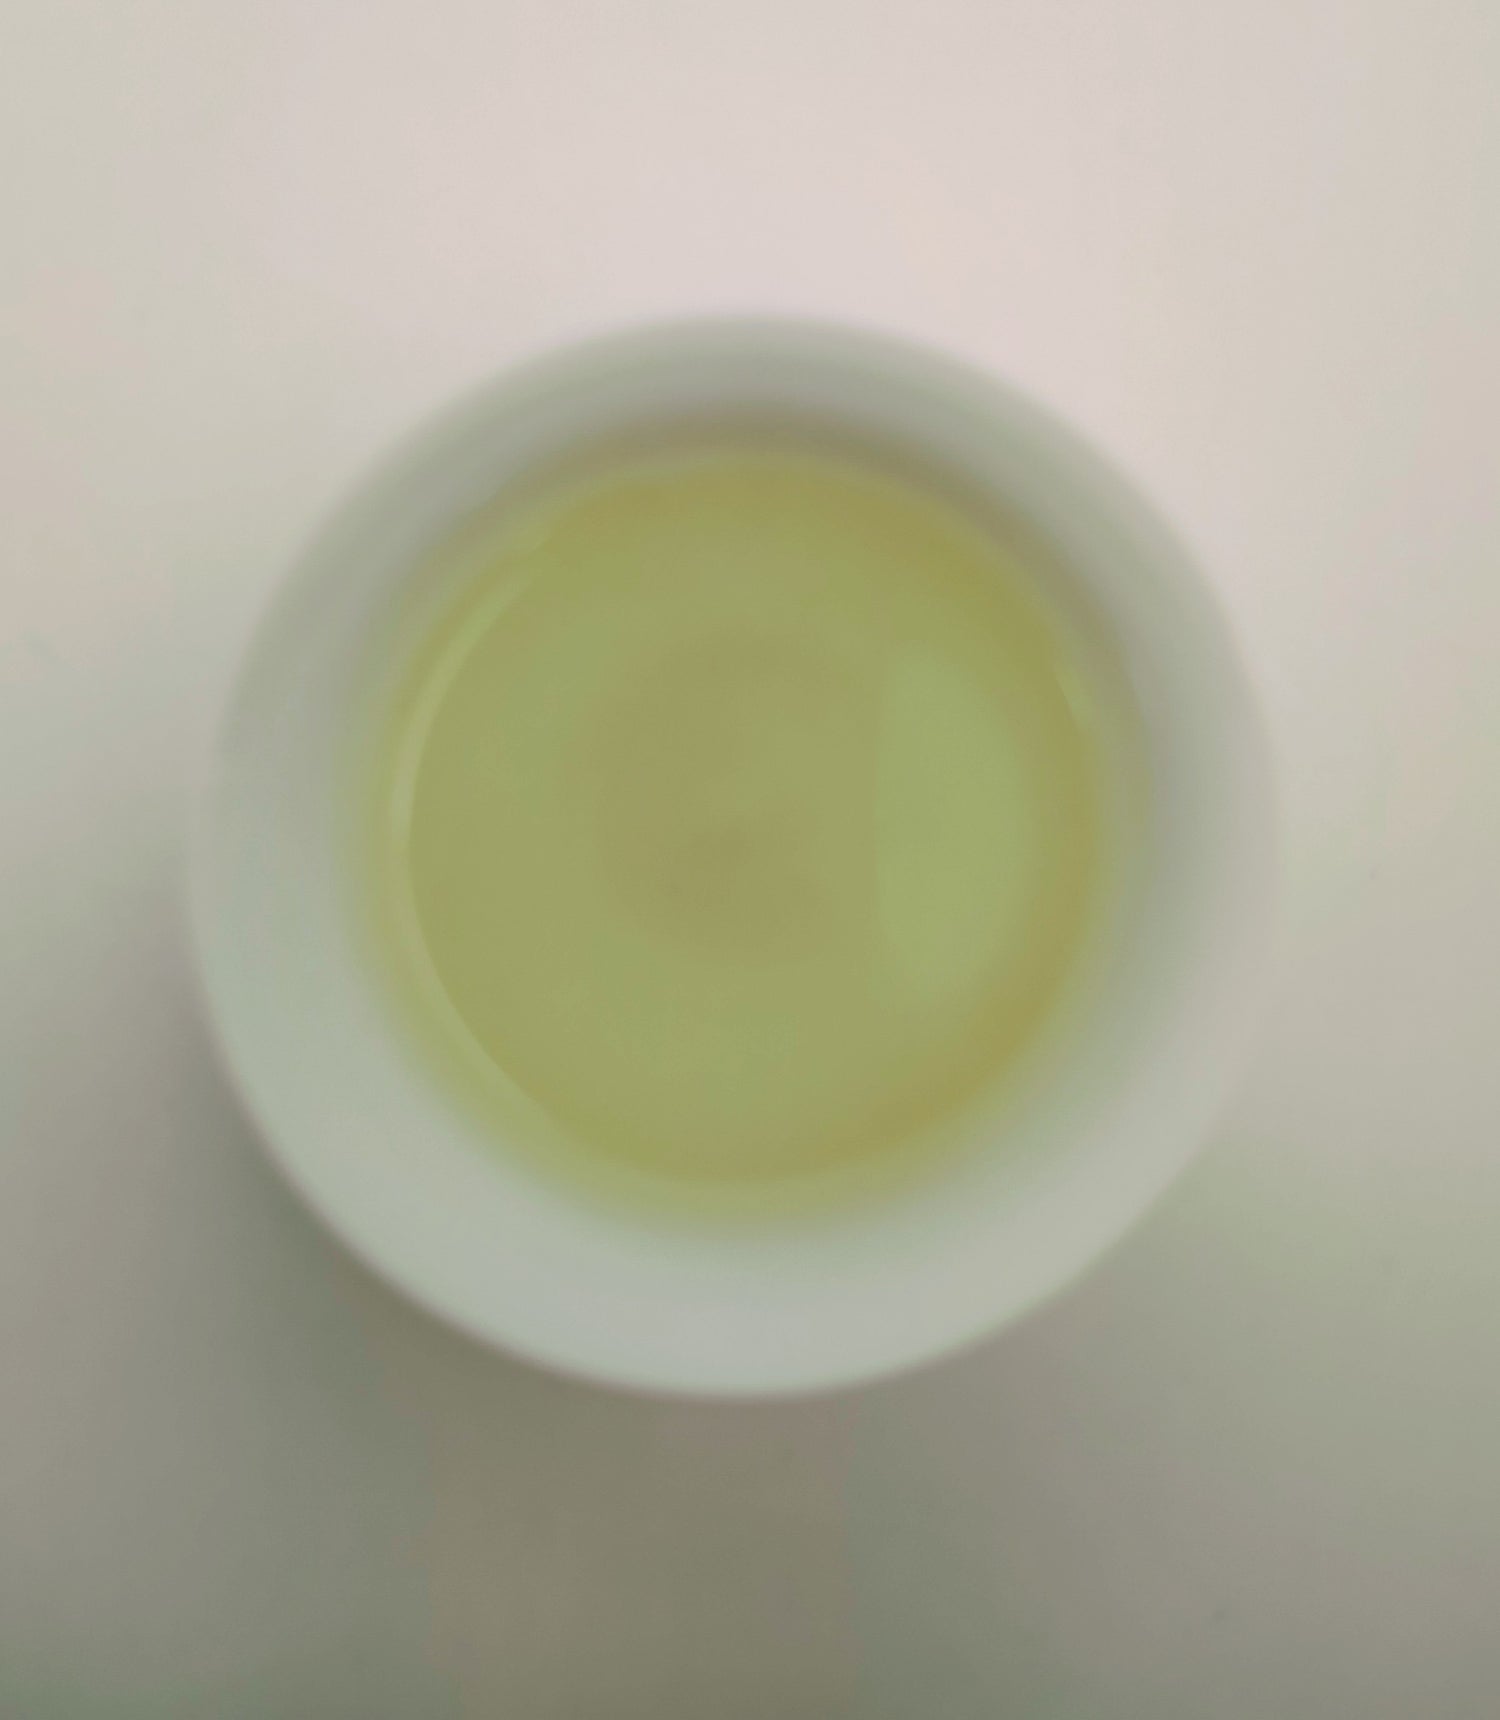 Picture of brewed green tea in a small cup, Yun Wu.